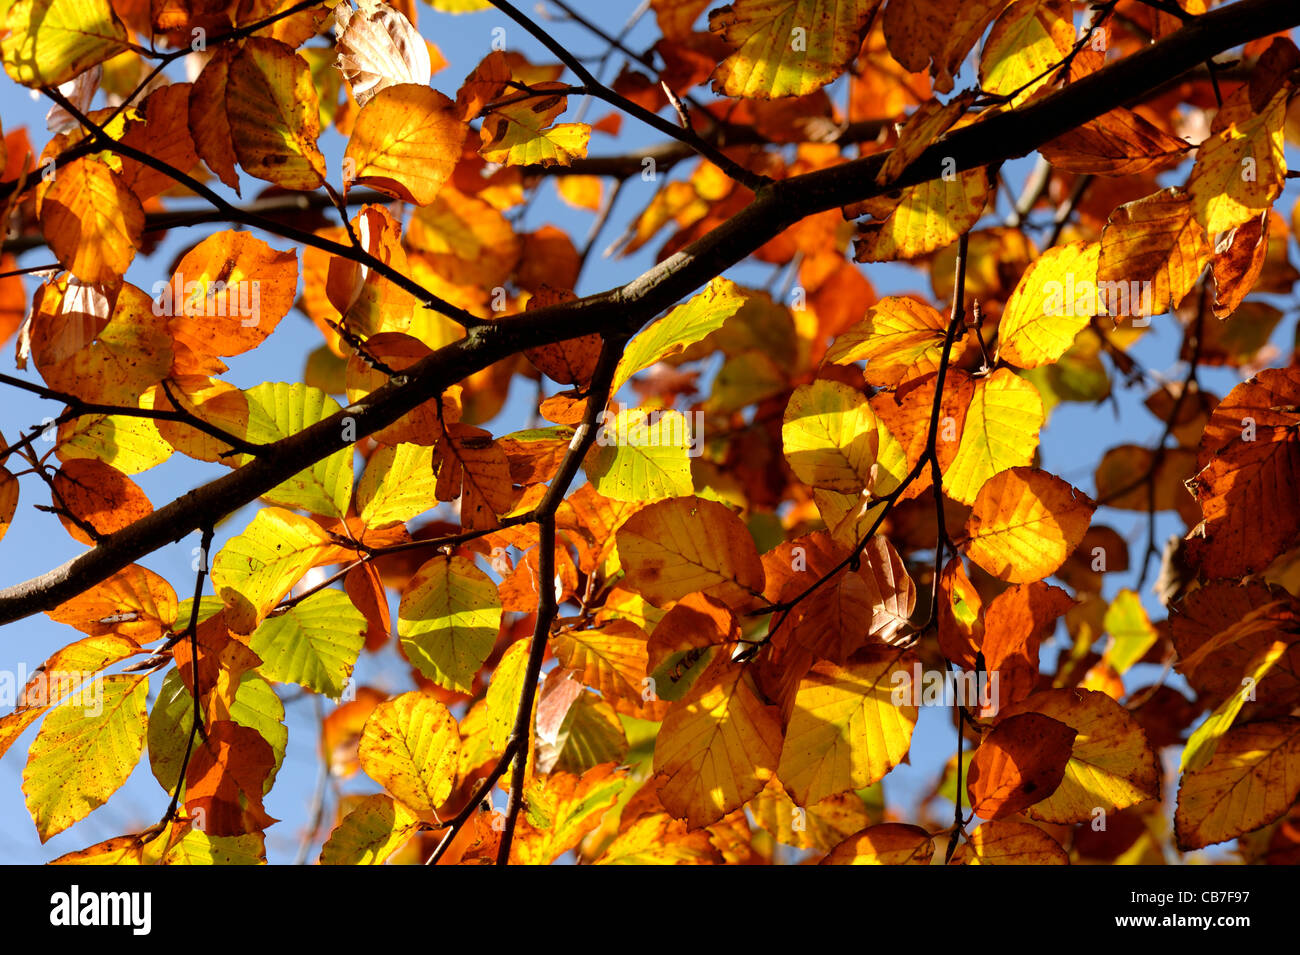 Rich golden beech leaves in autumn colour against a blue sky Stock Photo